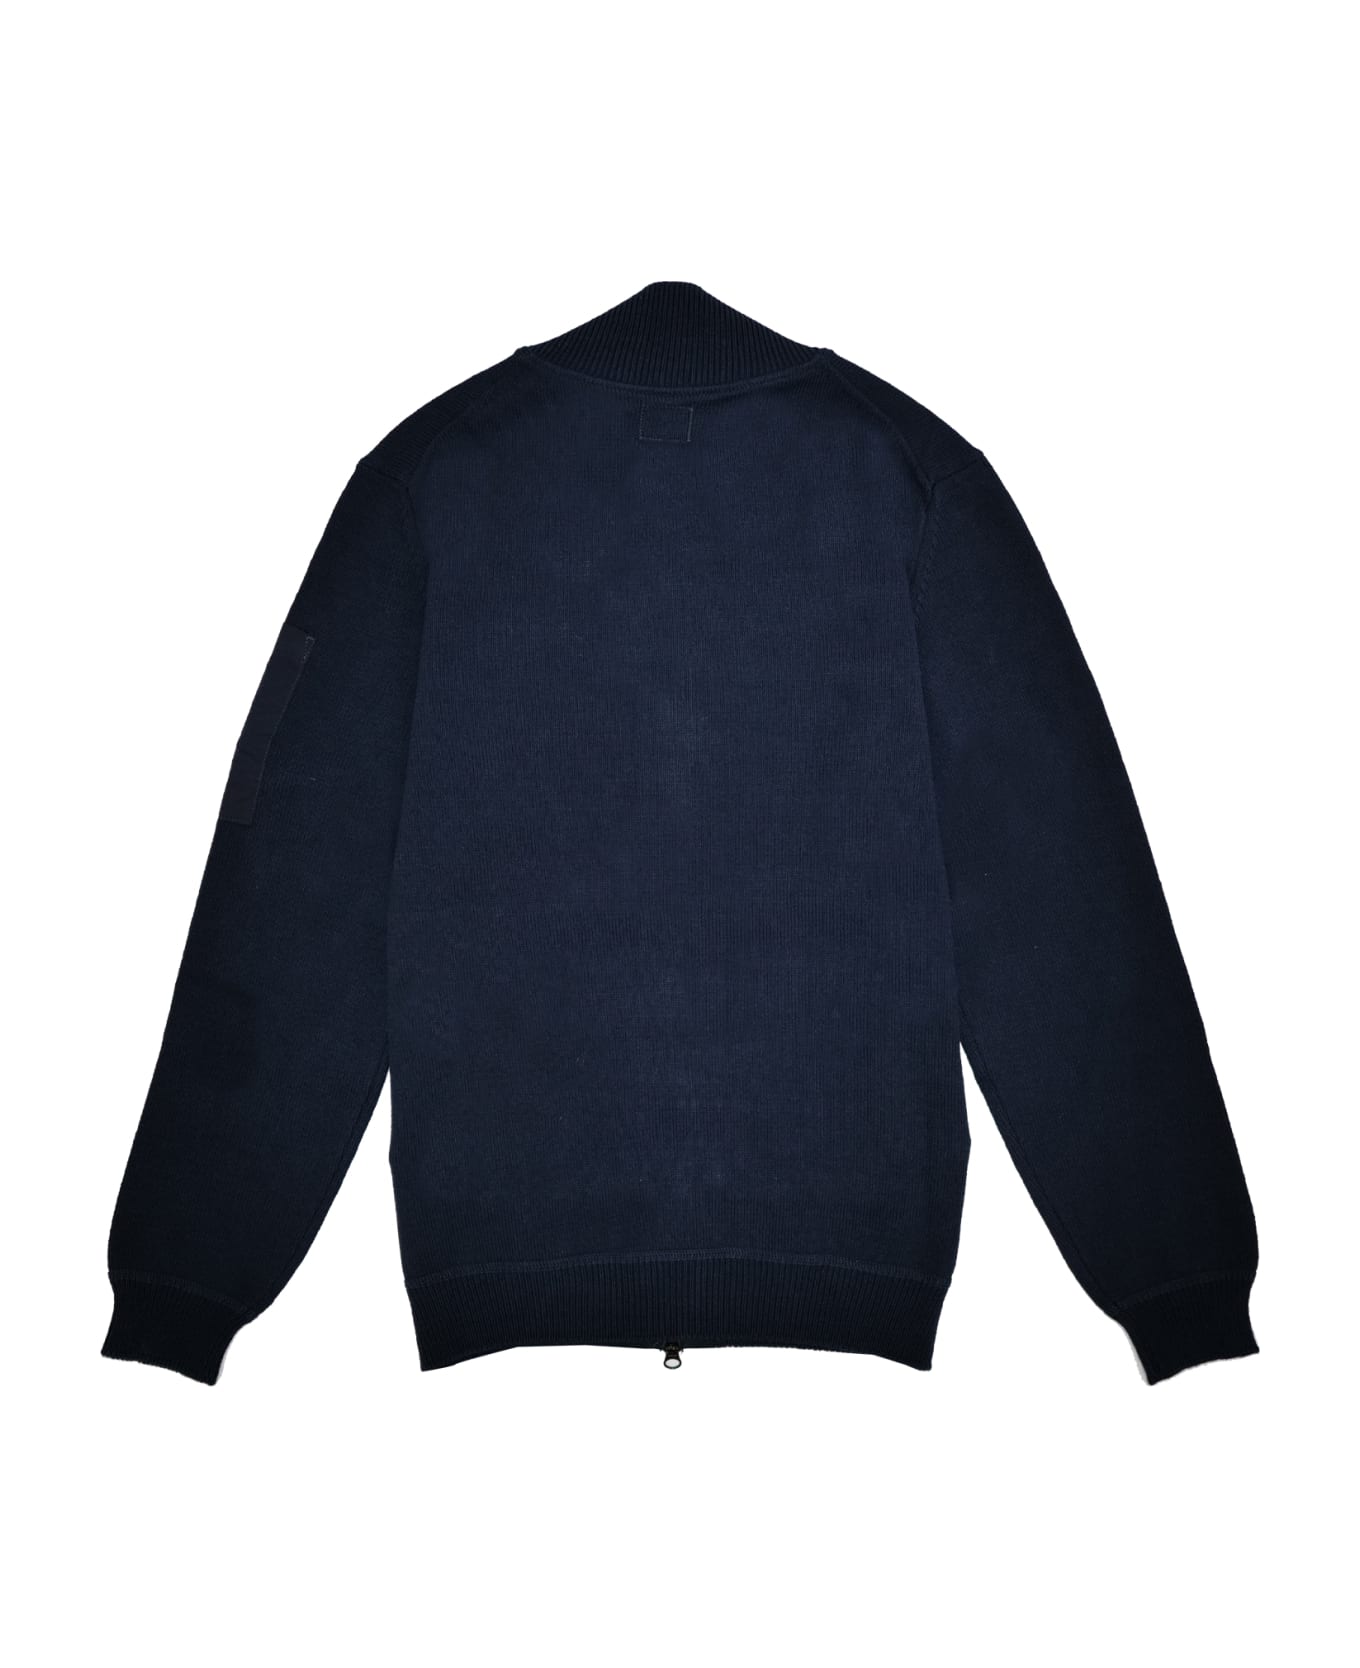 C.P. Company Logo Patched Zipped Knit Sweatshirt - TOTAL ECLIPSE フリース